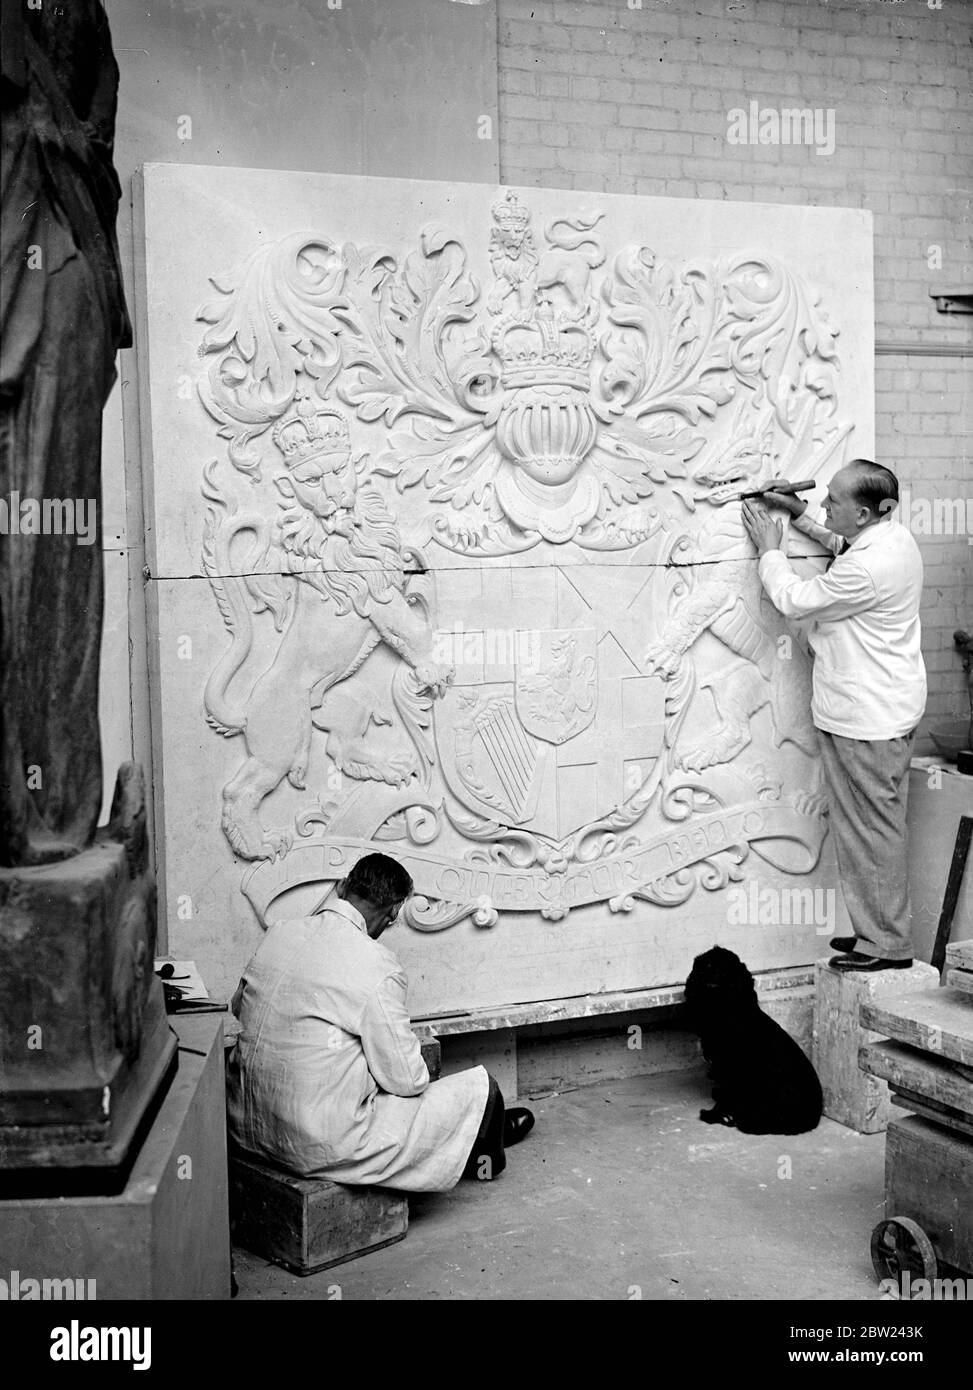 82 Heraldic shields for the British Pavilion at the New York World Fair are being made in the London studio of Mr Gilbert Bayes, the sculptor. The heraldic designs were verified by Mr Anthony Wagner, Portcullis Pursuivant at the College of Arms. Photo shows: Mr Gilbert Bayes (right) and an assistant at work on the Oliver Cromwell shield for the British Pavilion of the New York World Fair in Mr BayesLondon studio. 12 October 1938 Stock Photo